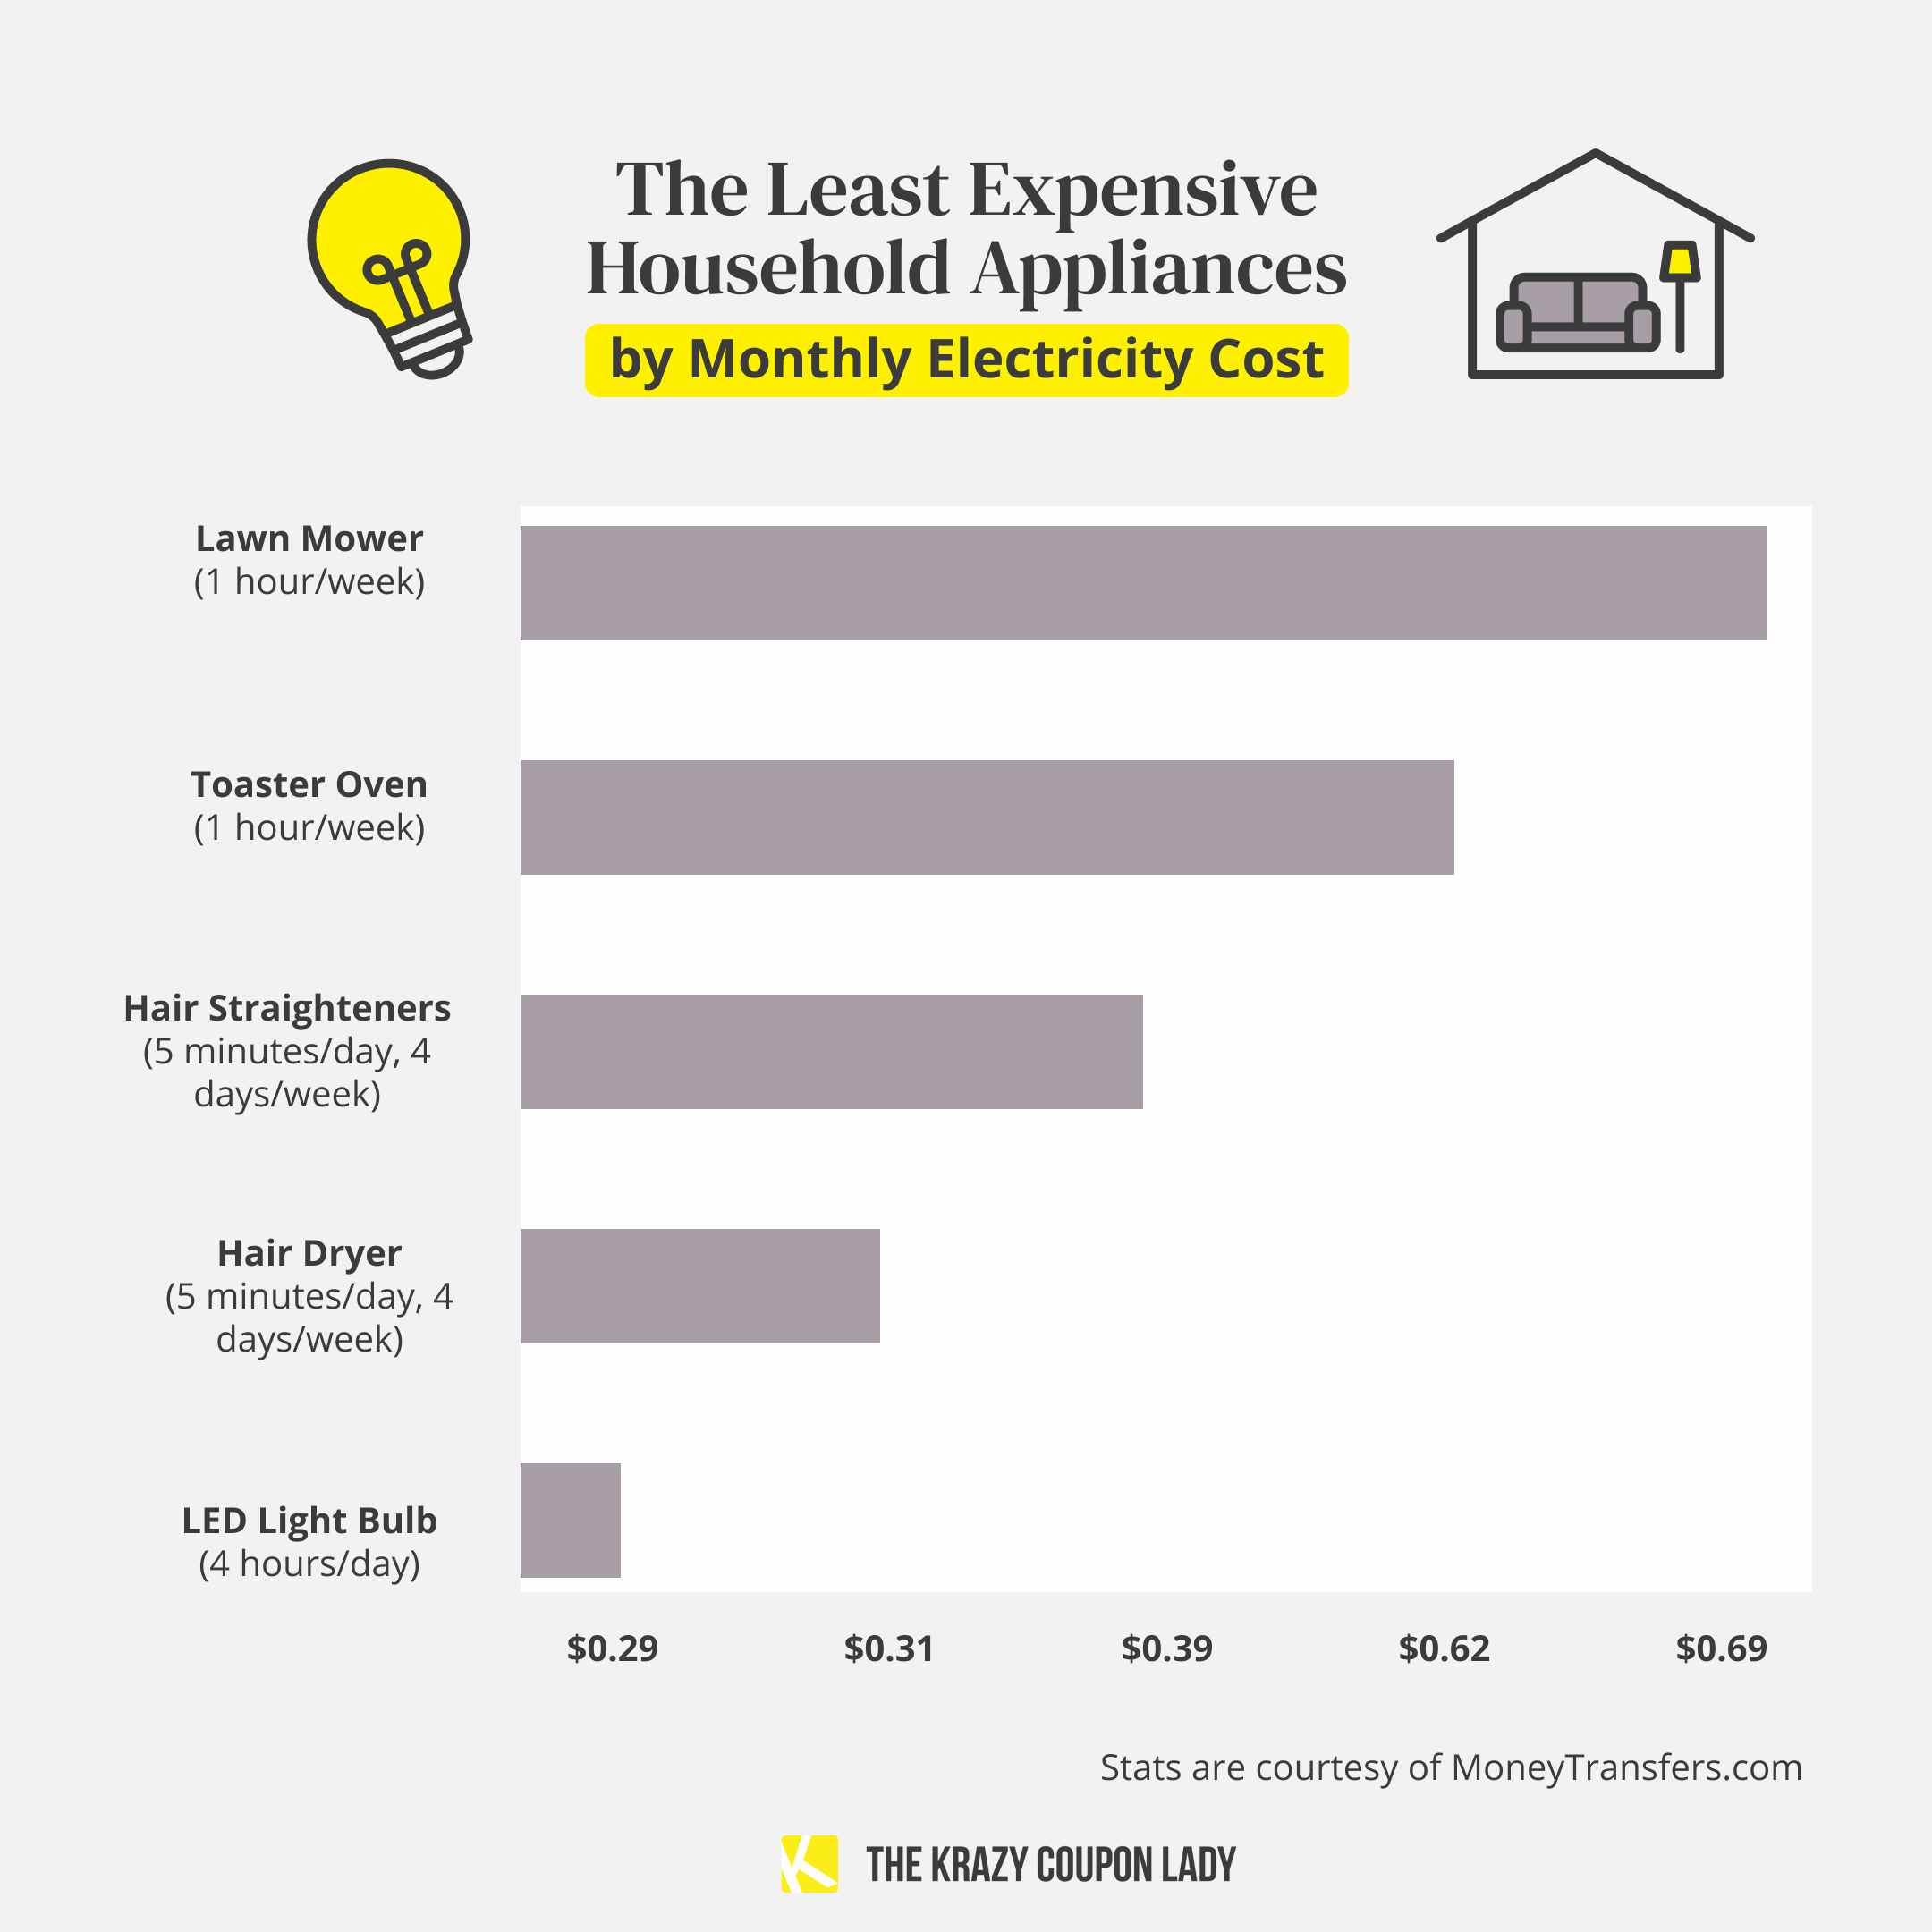 A chart showing the least expensive household appliances by monthly electricity cost starting with lawn mower at 69 cents, followed by toaster oven at 62 cents, hair straighteners at 39 cents, hair dryers at 31 cents, and LED light bulbs at 29 cents.